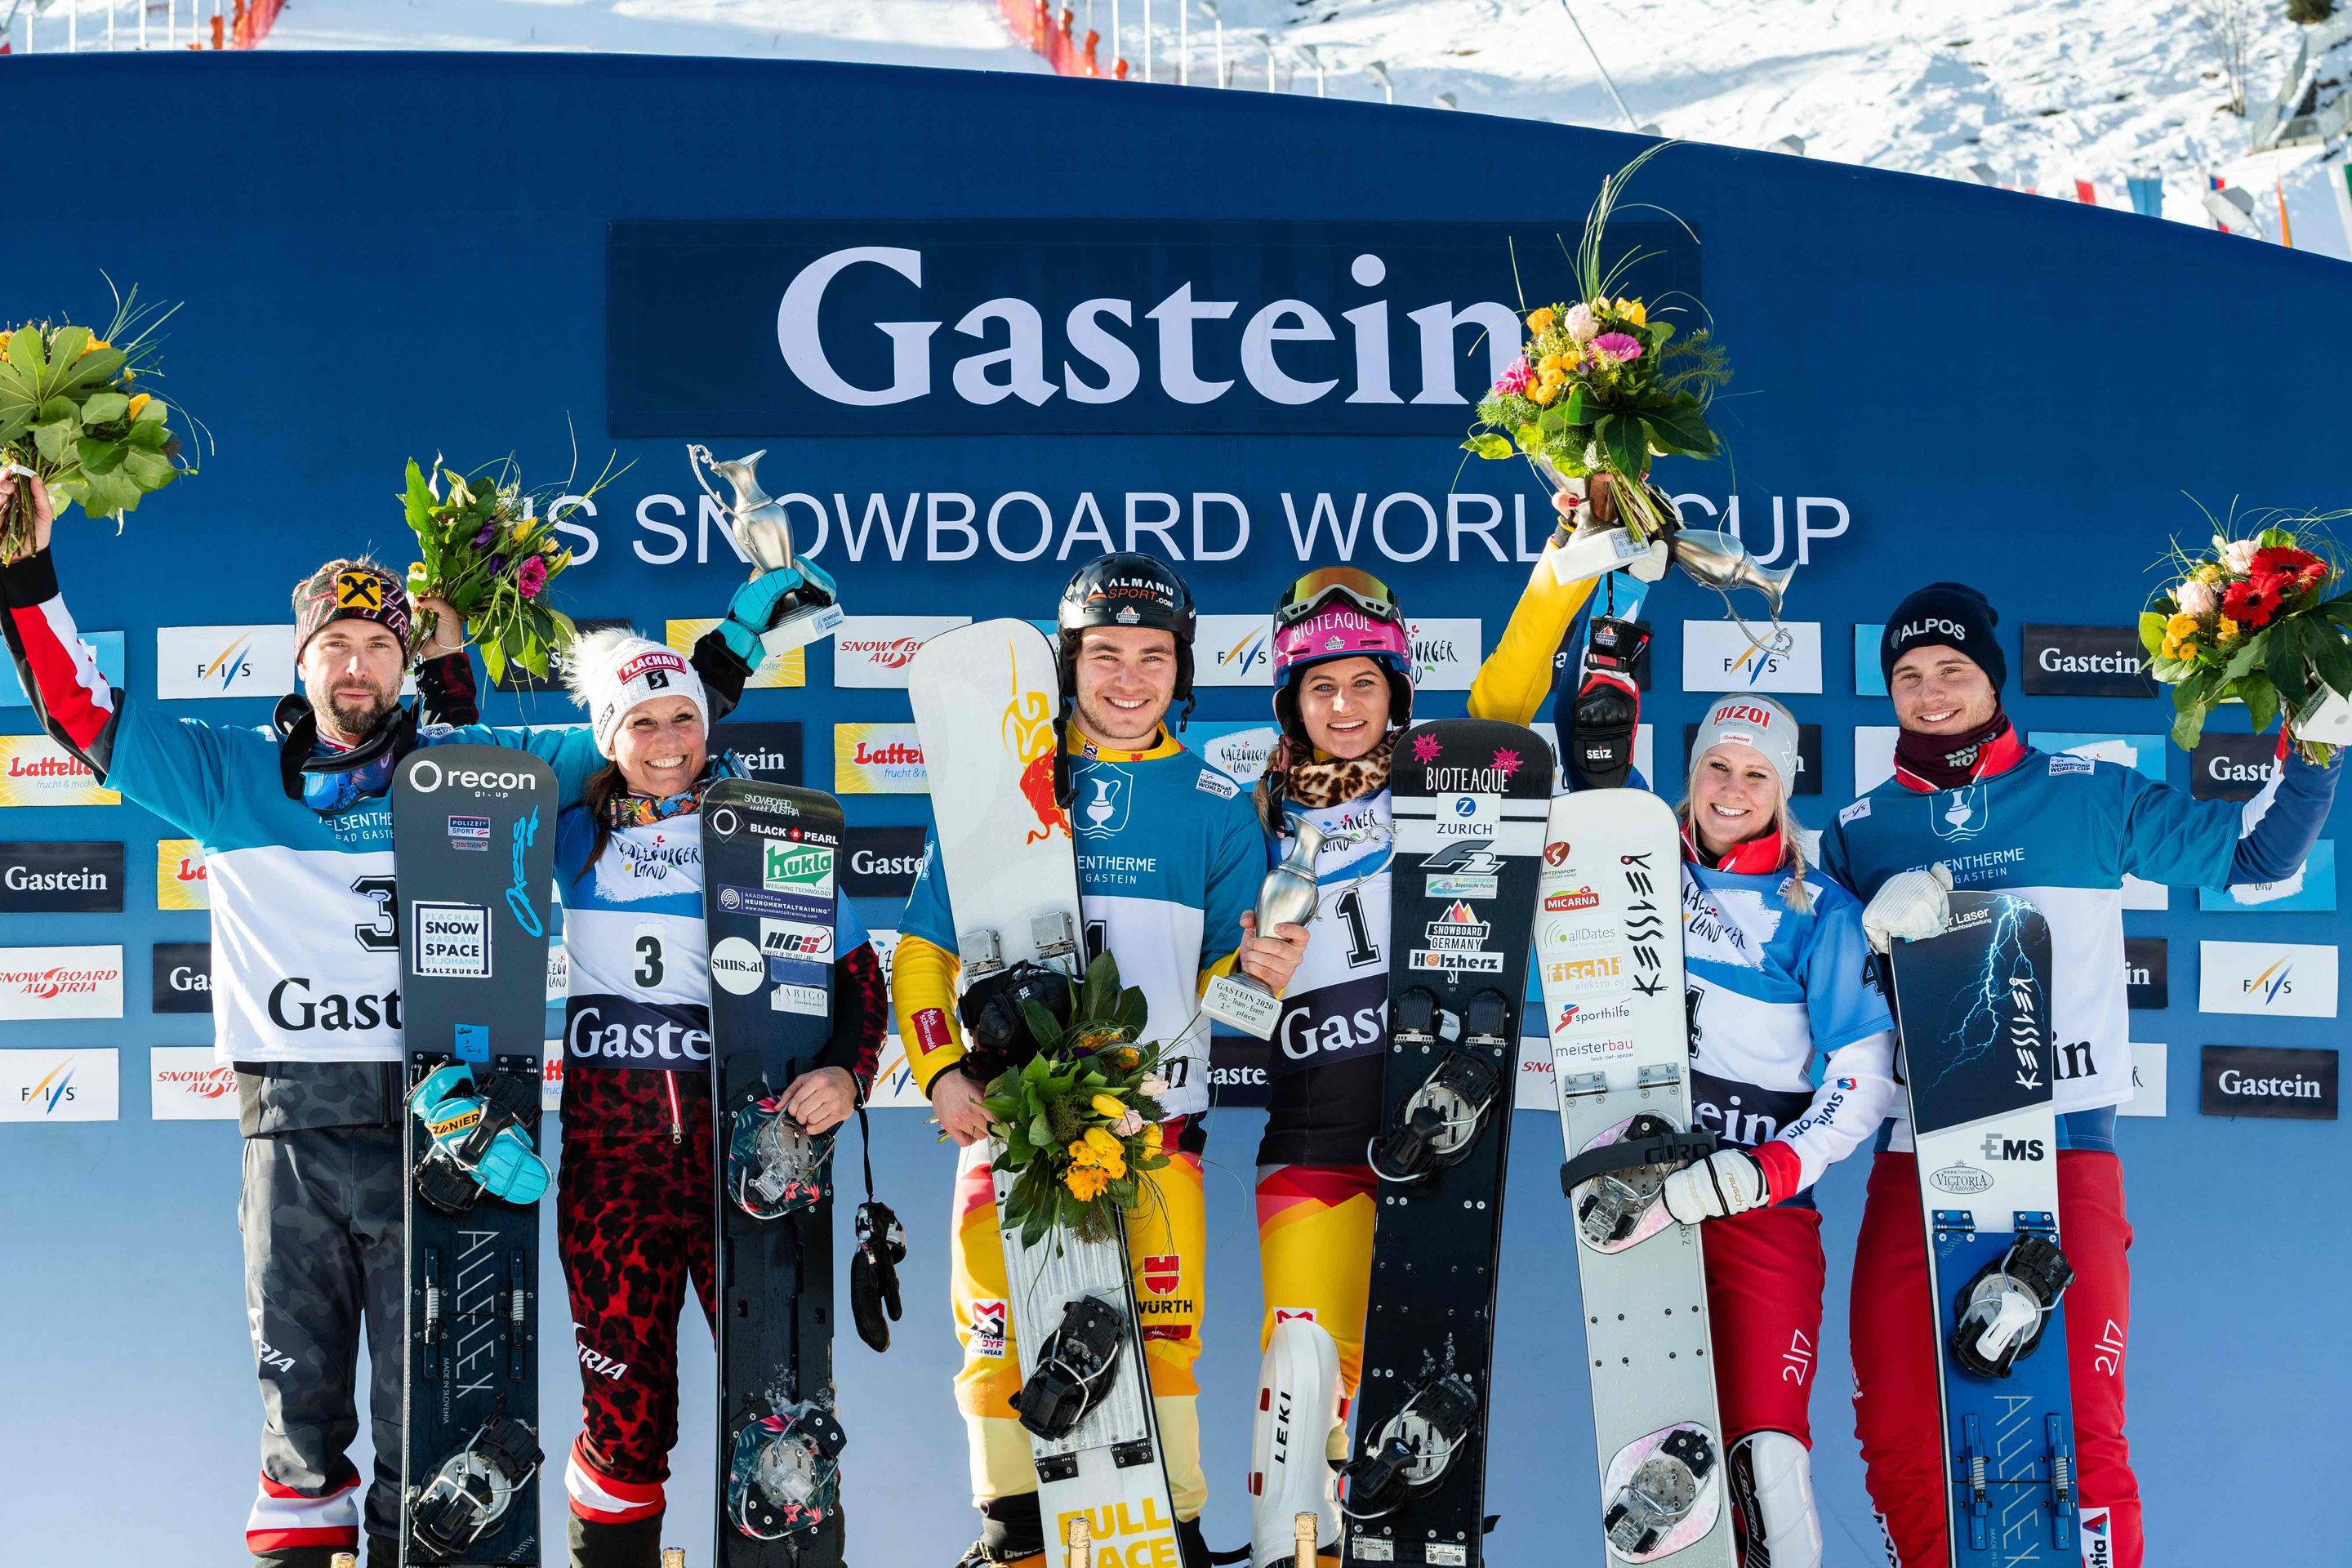 FIS Snowboard World Cup - Bad Gastein AUT - Snowboard Parallel Team Event - Podium with 2nd team Austria1 (RIEGLER Claudia and PROMMEGGER Andreas), 1st team Germany1 (HOFMEISTER Ramona Theresia and BAUMEISTER Stefan) and 3rd team Switzerland 1 (ZOGG Julie and CAVIEZEL Dario) © Miha Matavz/FIS